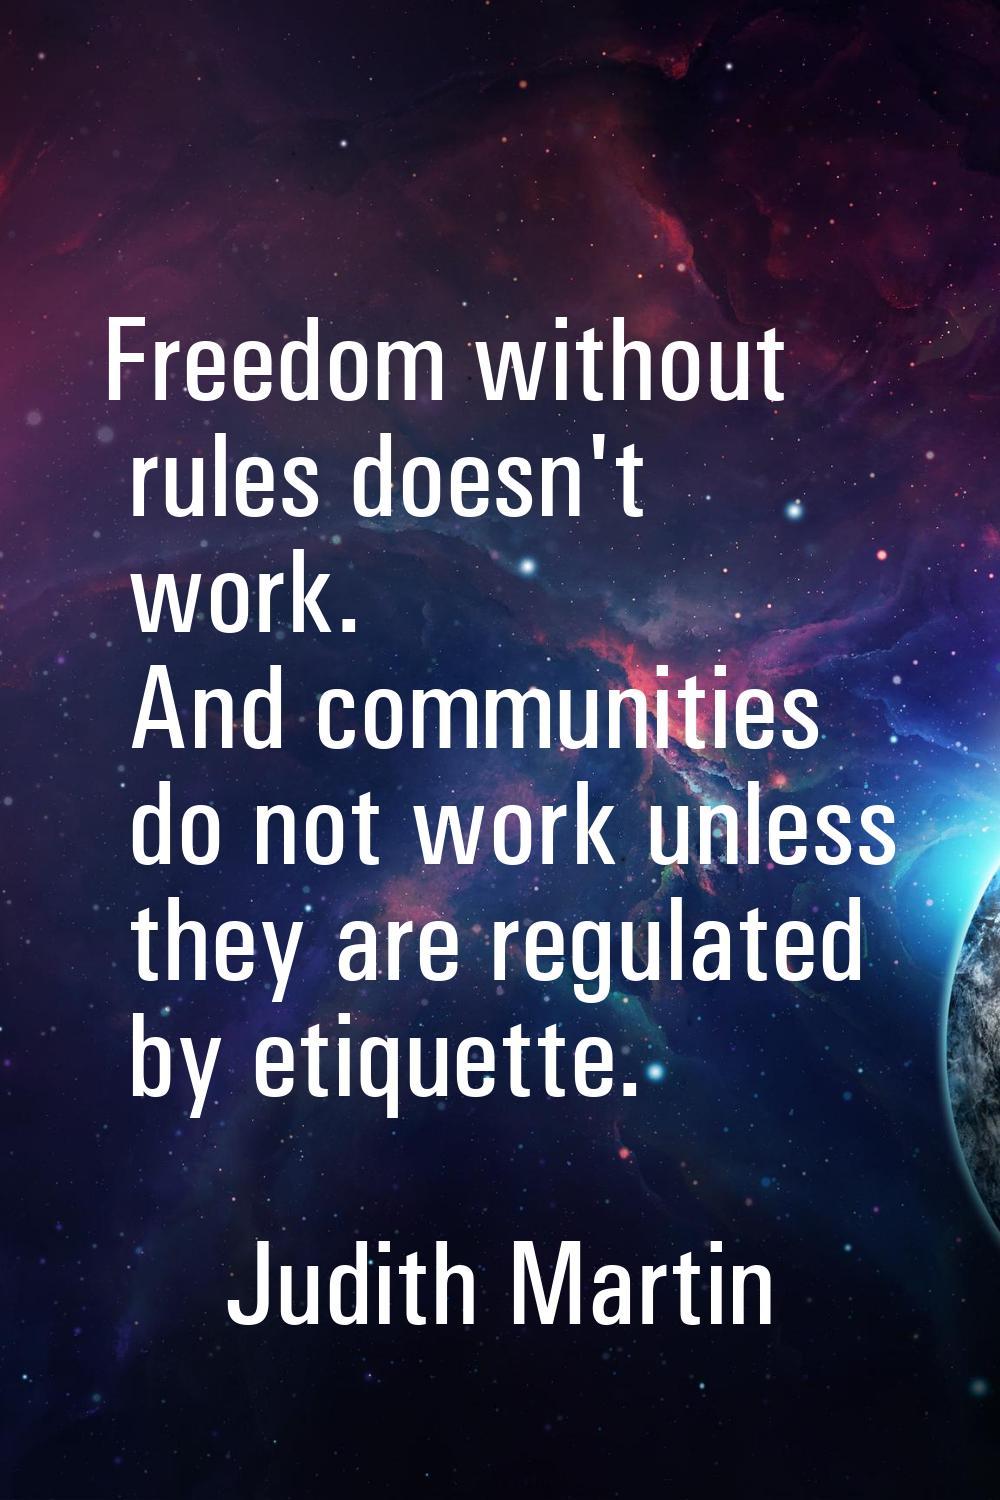 Freedom without rules doesn't work. And communities do not work unless they are regulated by etique